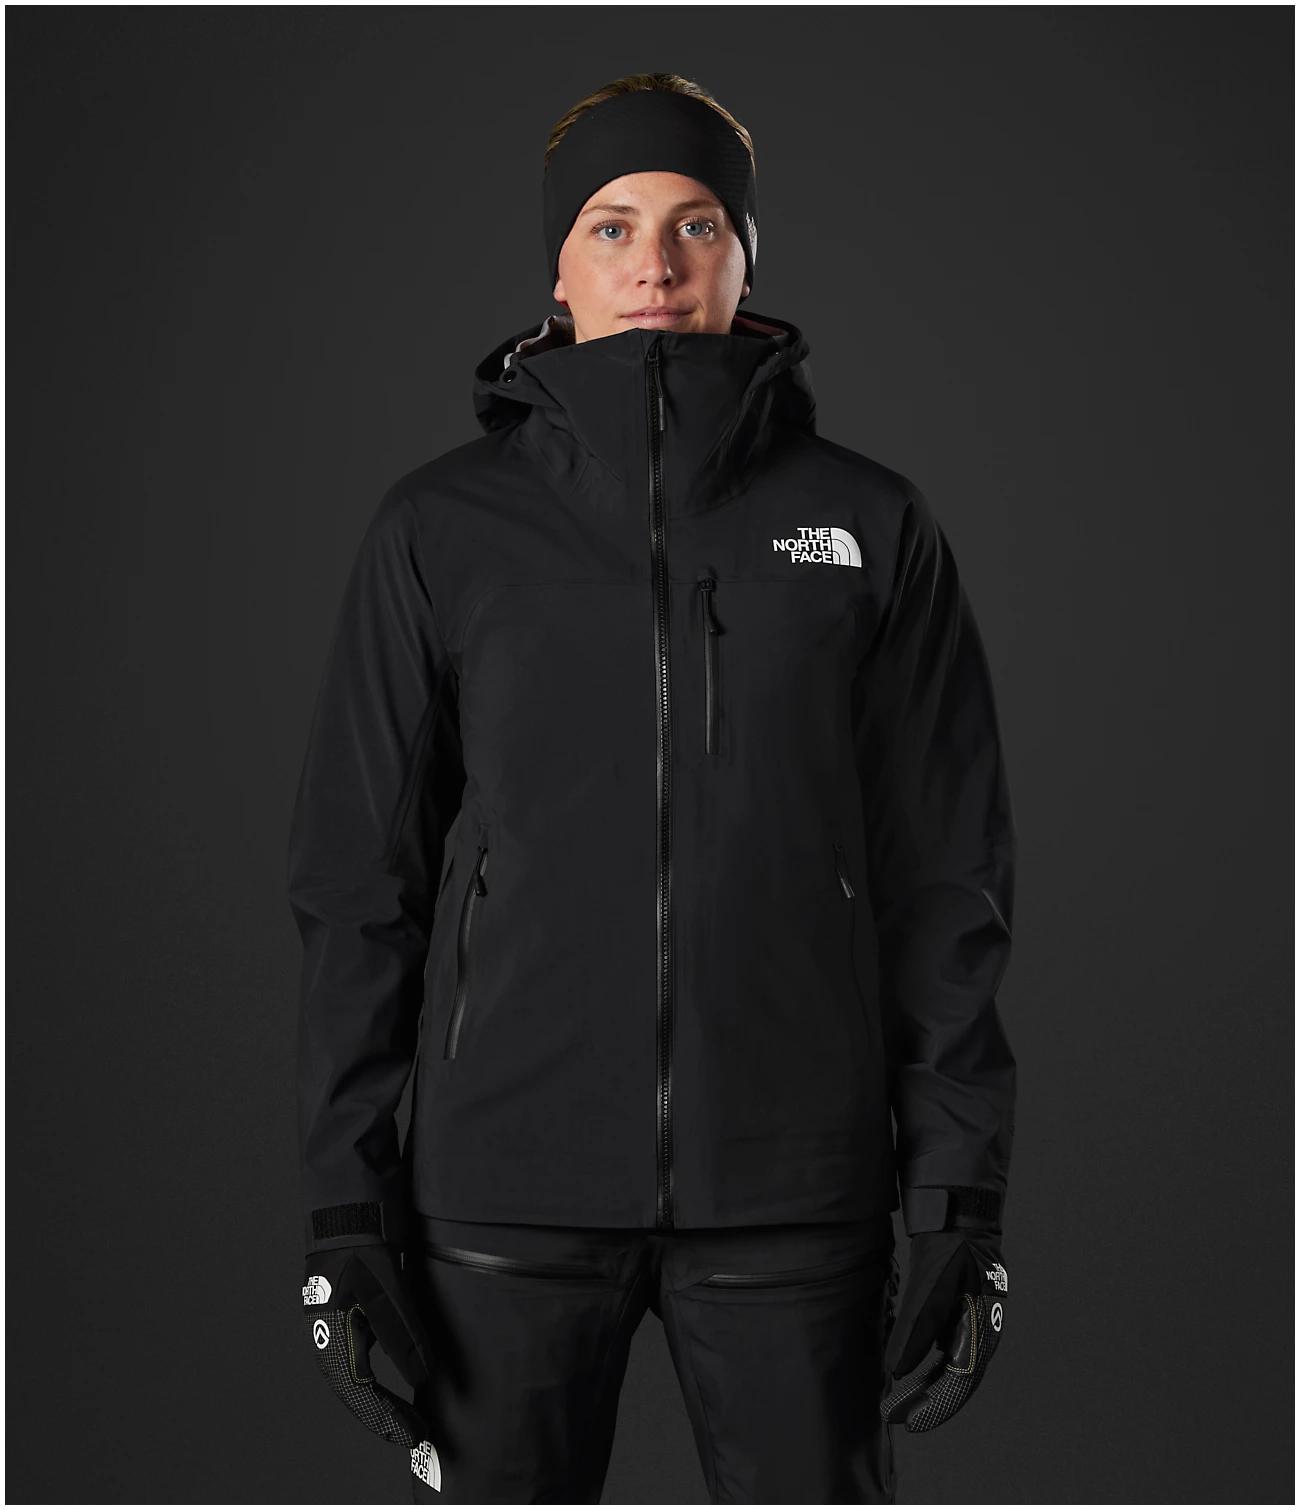 Women’s Summit Series Torre Egger FUTURELIGHT™ Jacket by THE NORTH FACE